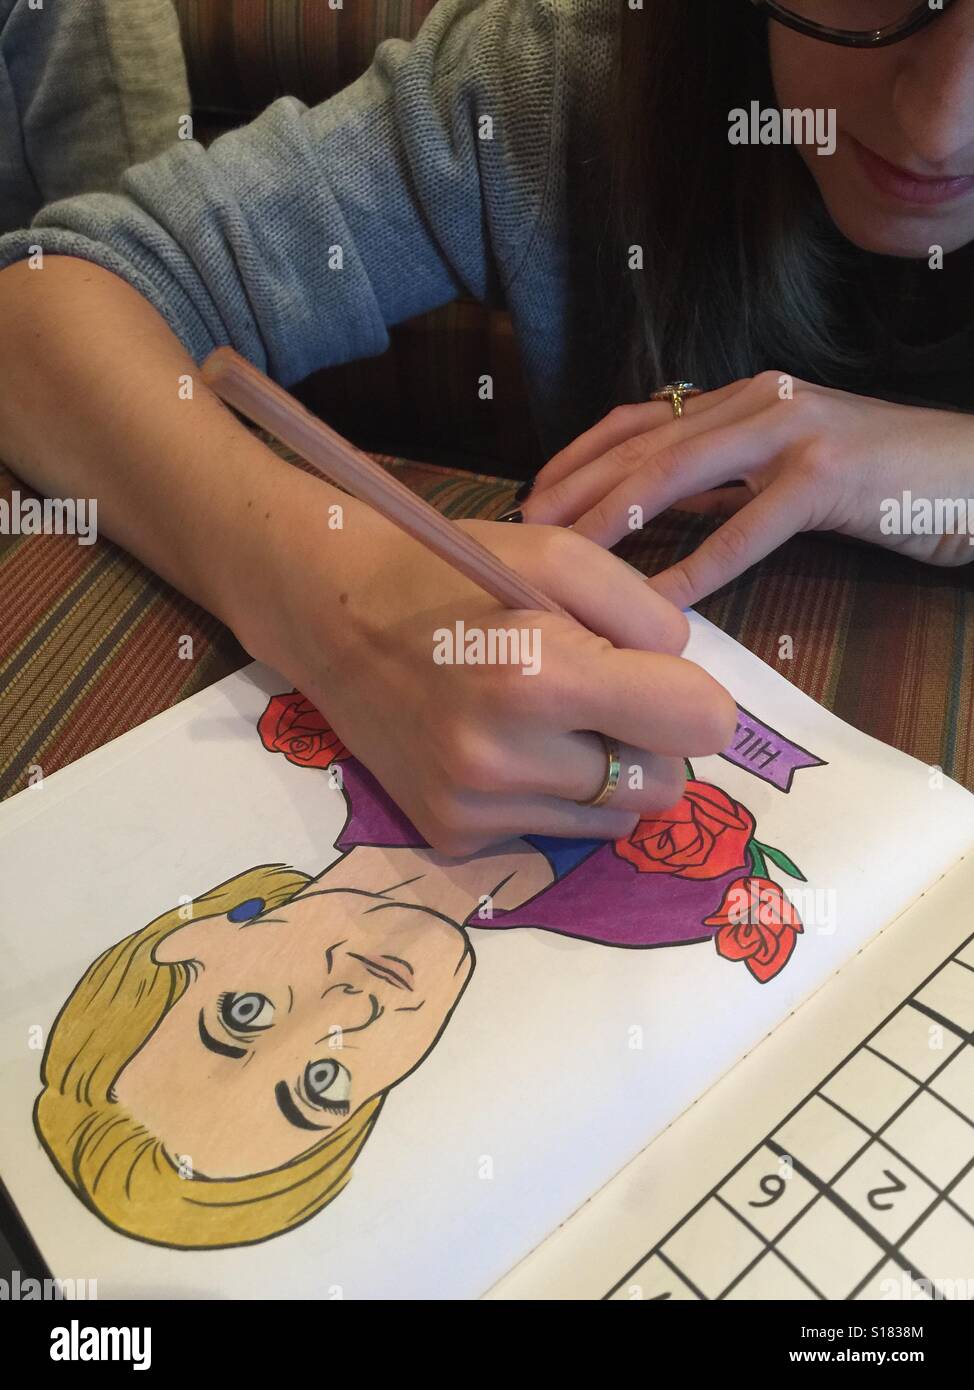 A young woman colors a picture of Hillary Clinton in an adult coloring book Stock Photo